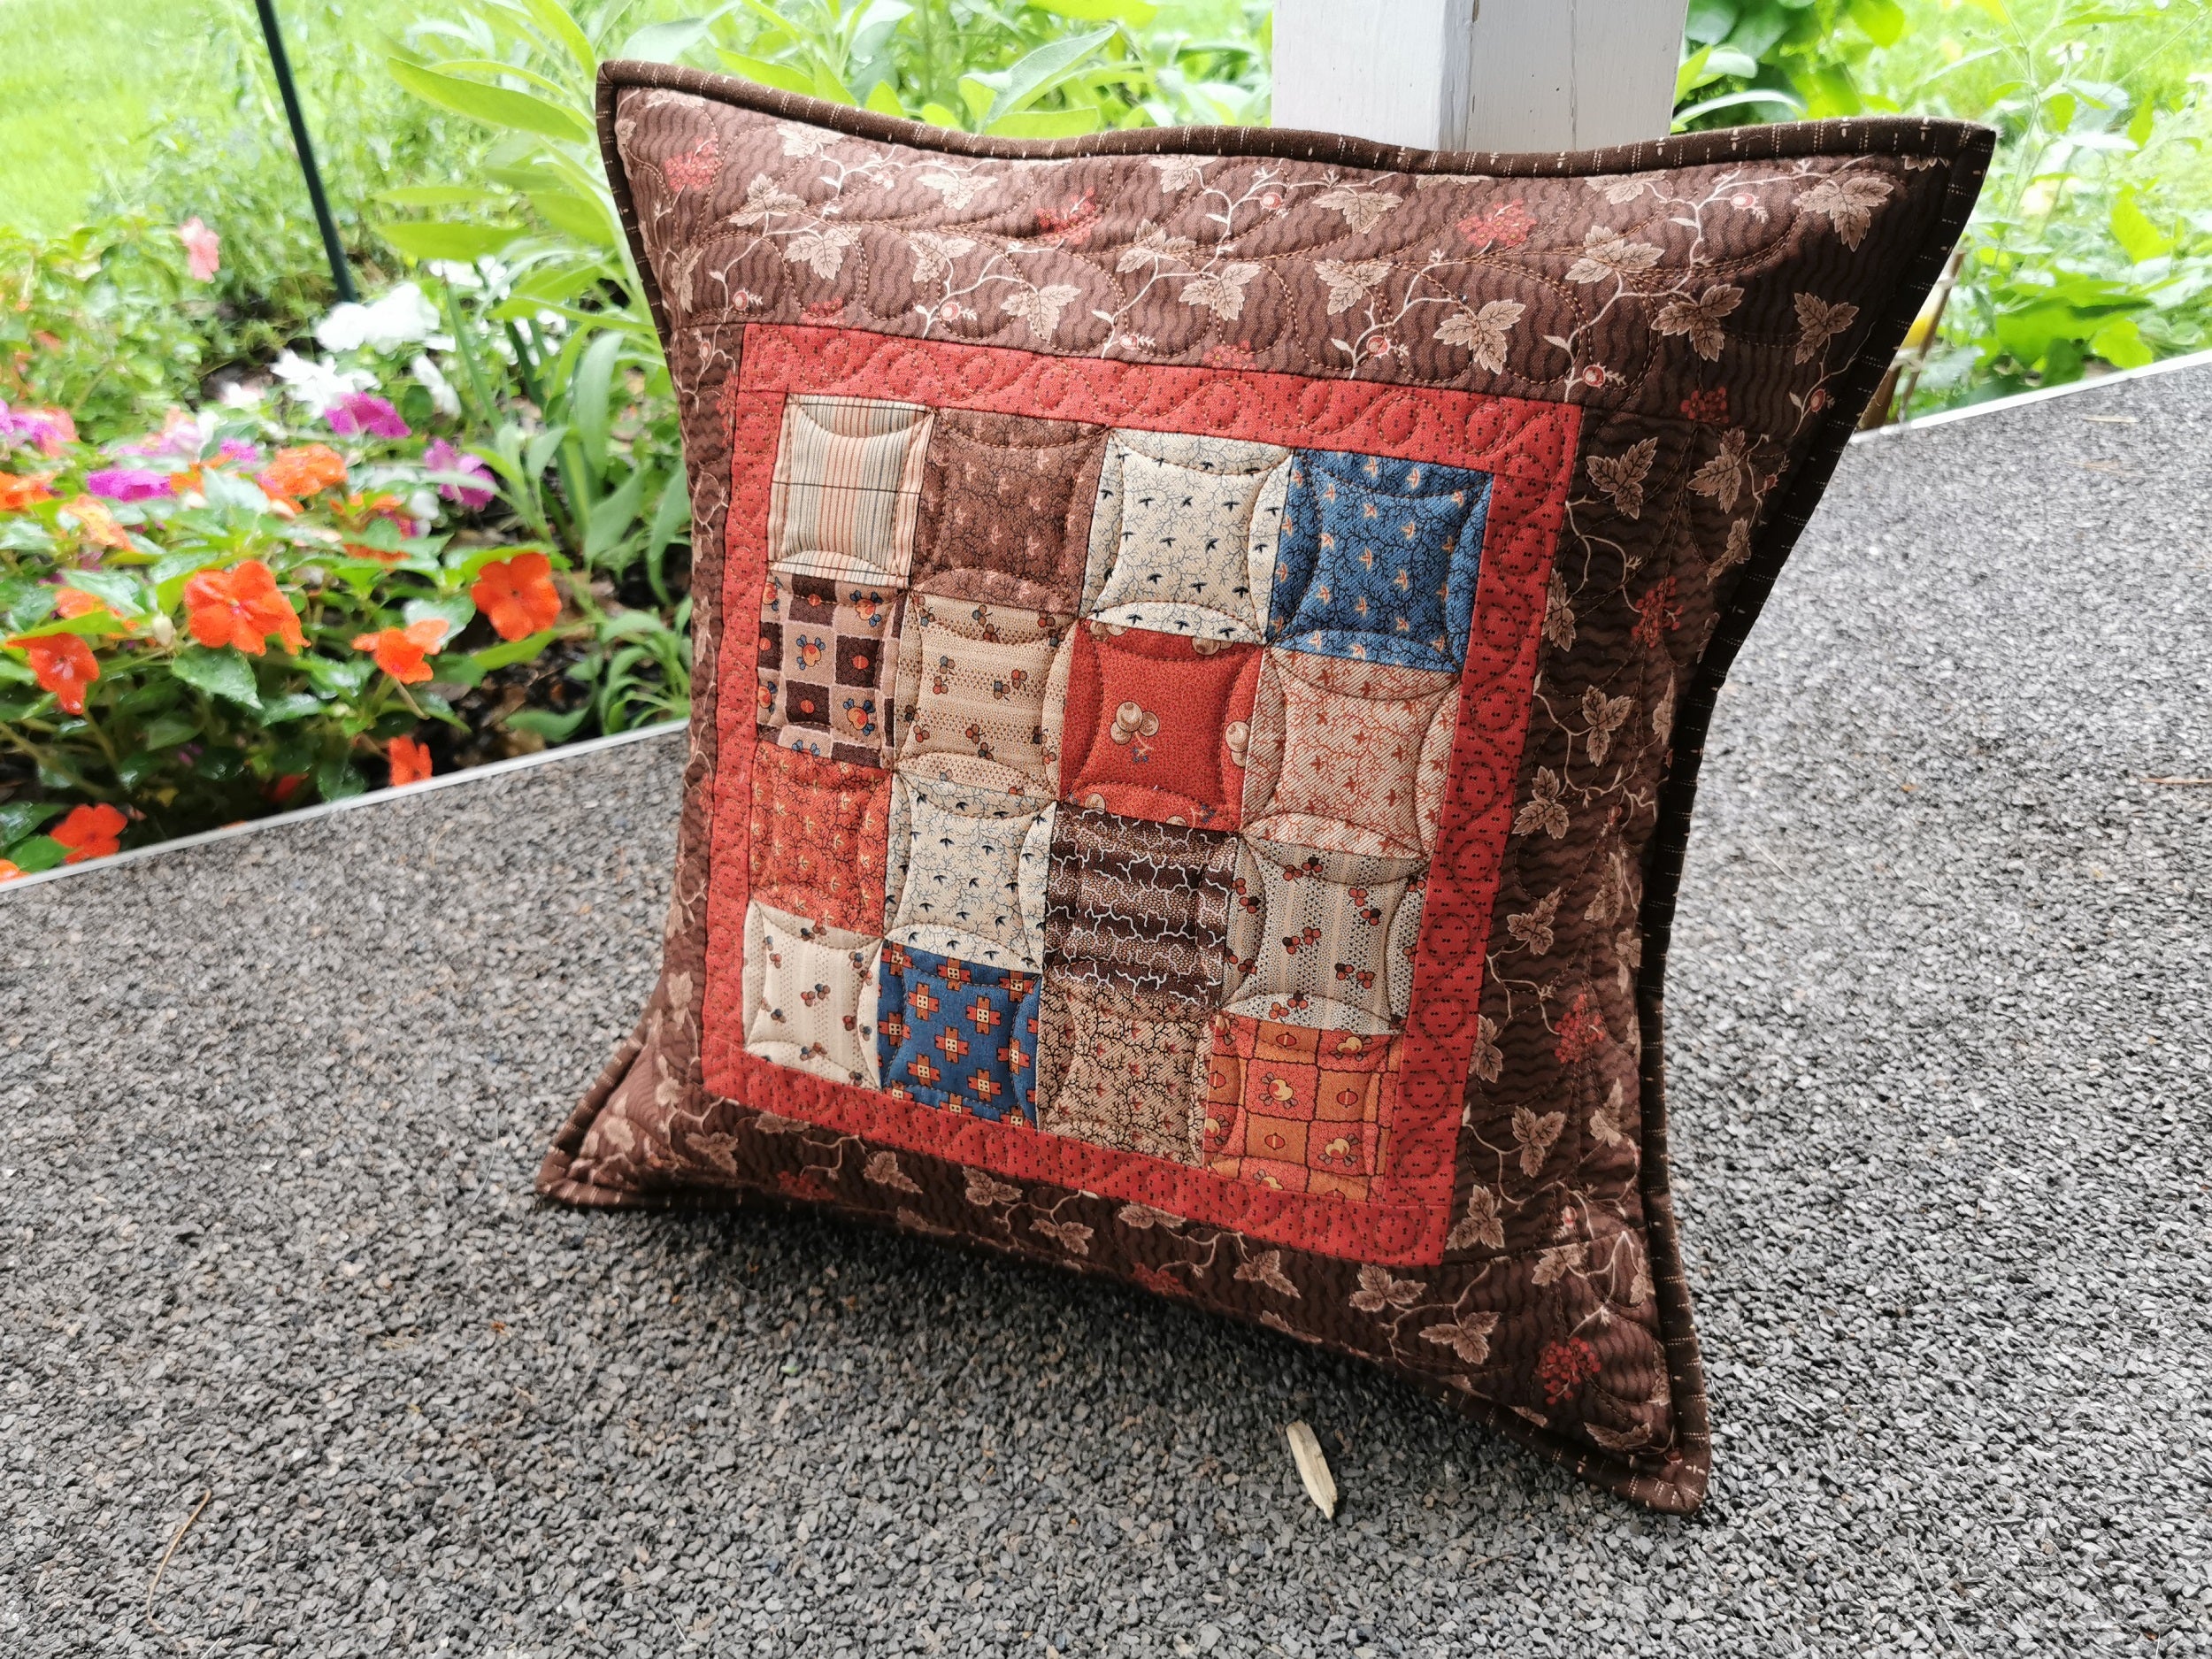 Rustic Quilted Pillow | Civil War Patchwork Sofa Pillow | 16 inch square Throw Pillow